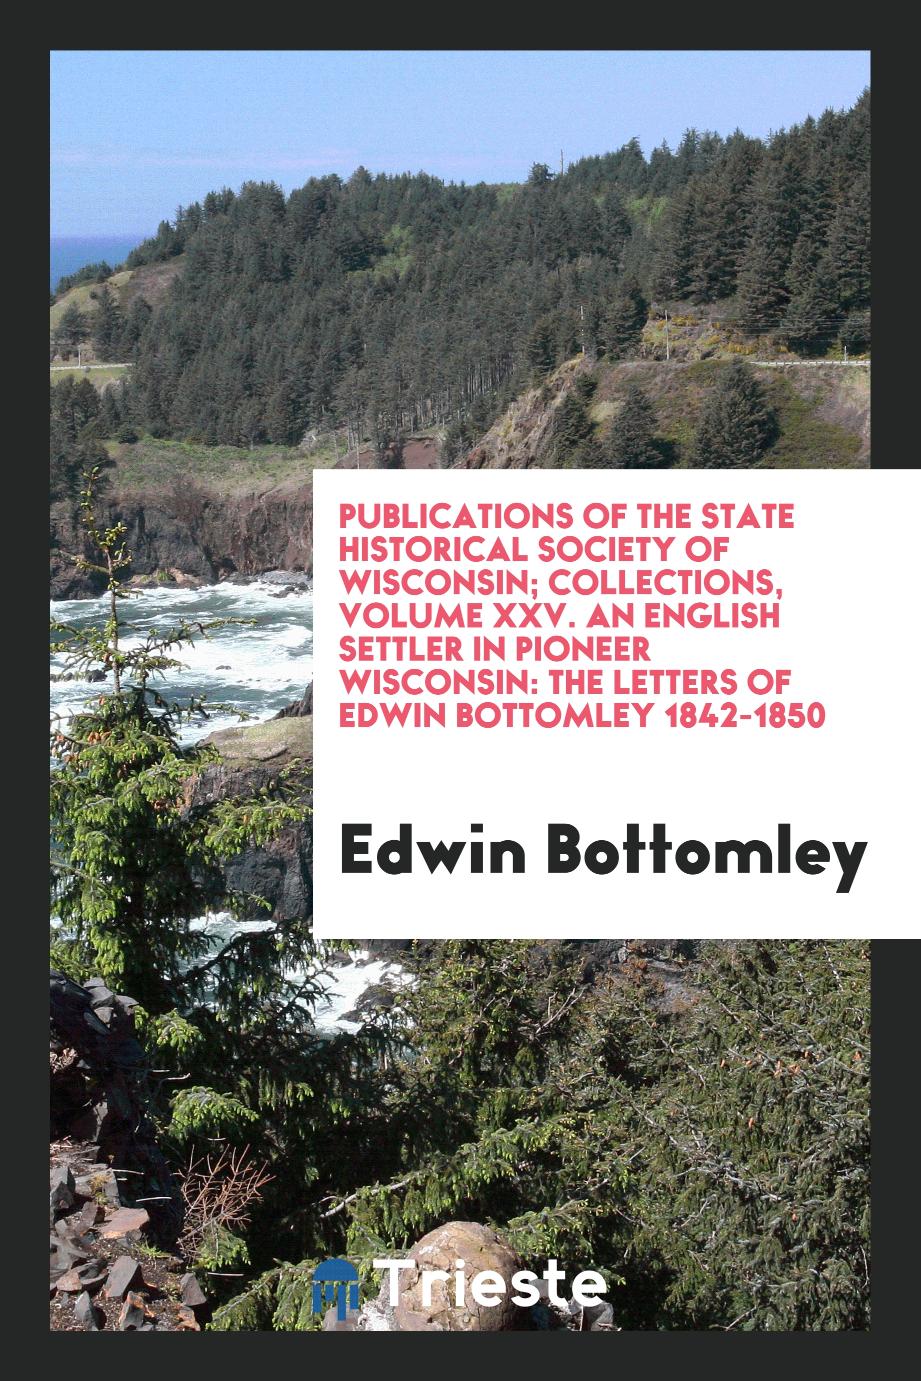 Publications of the State Historical Society of Wisconsin; Collections, Volume XXV. An English Settler in Pioneer Wisconsin: The Letters of Edwin Bottomley 1842-1850